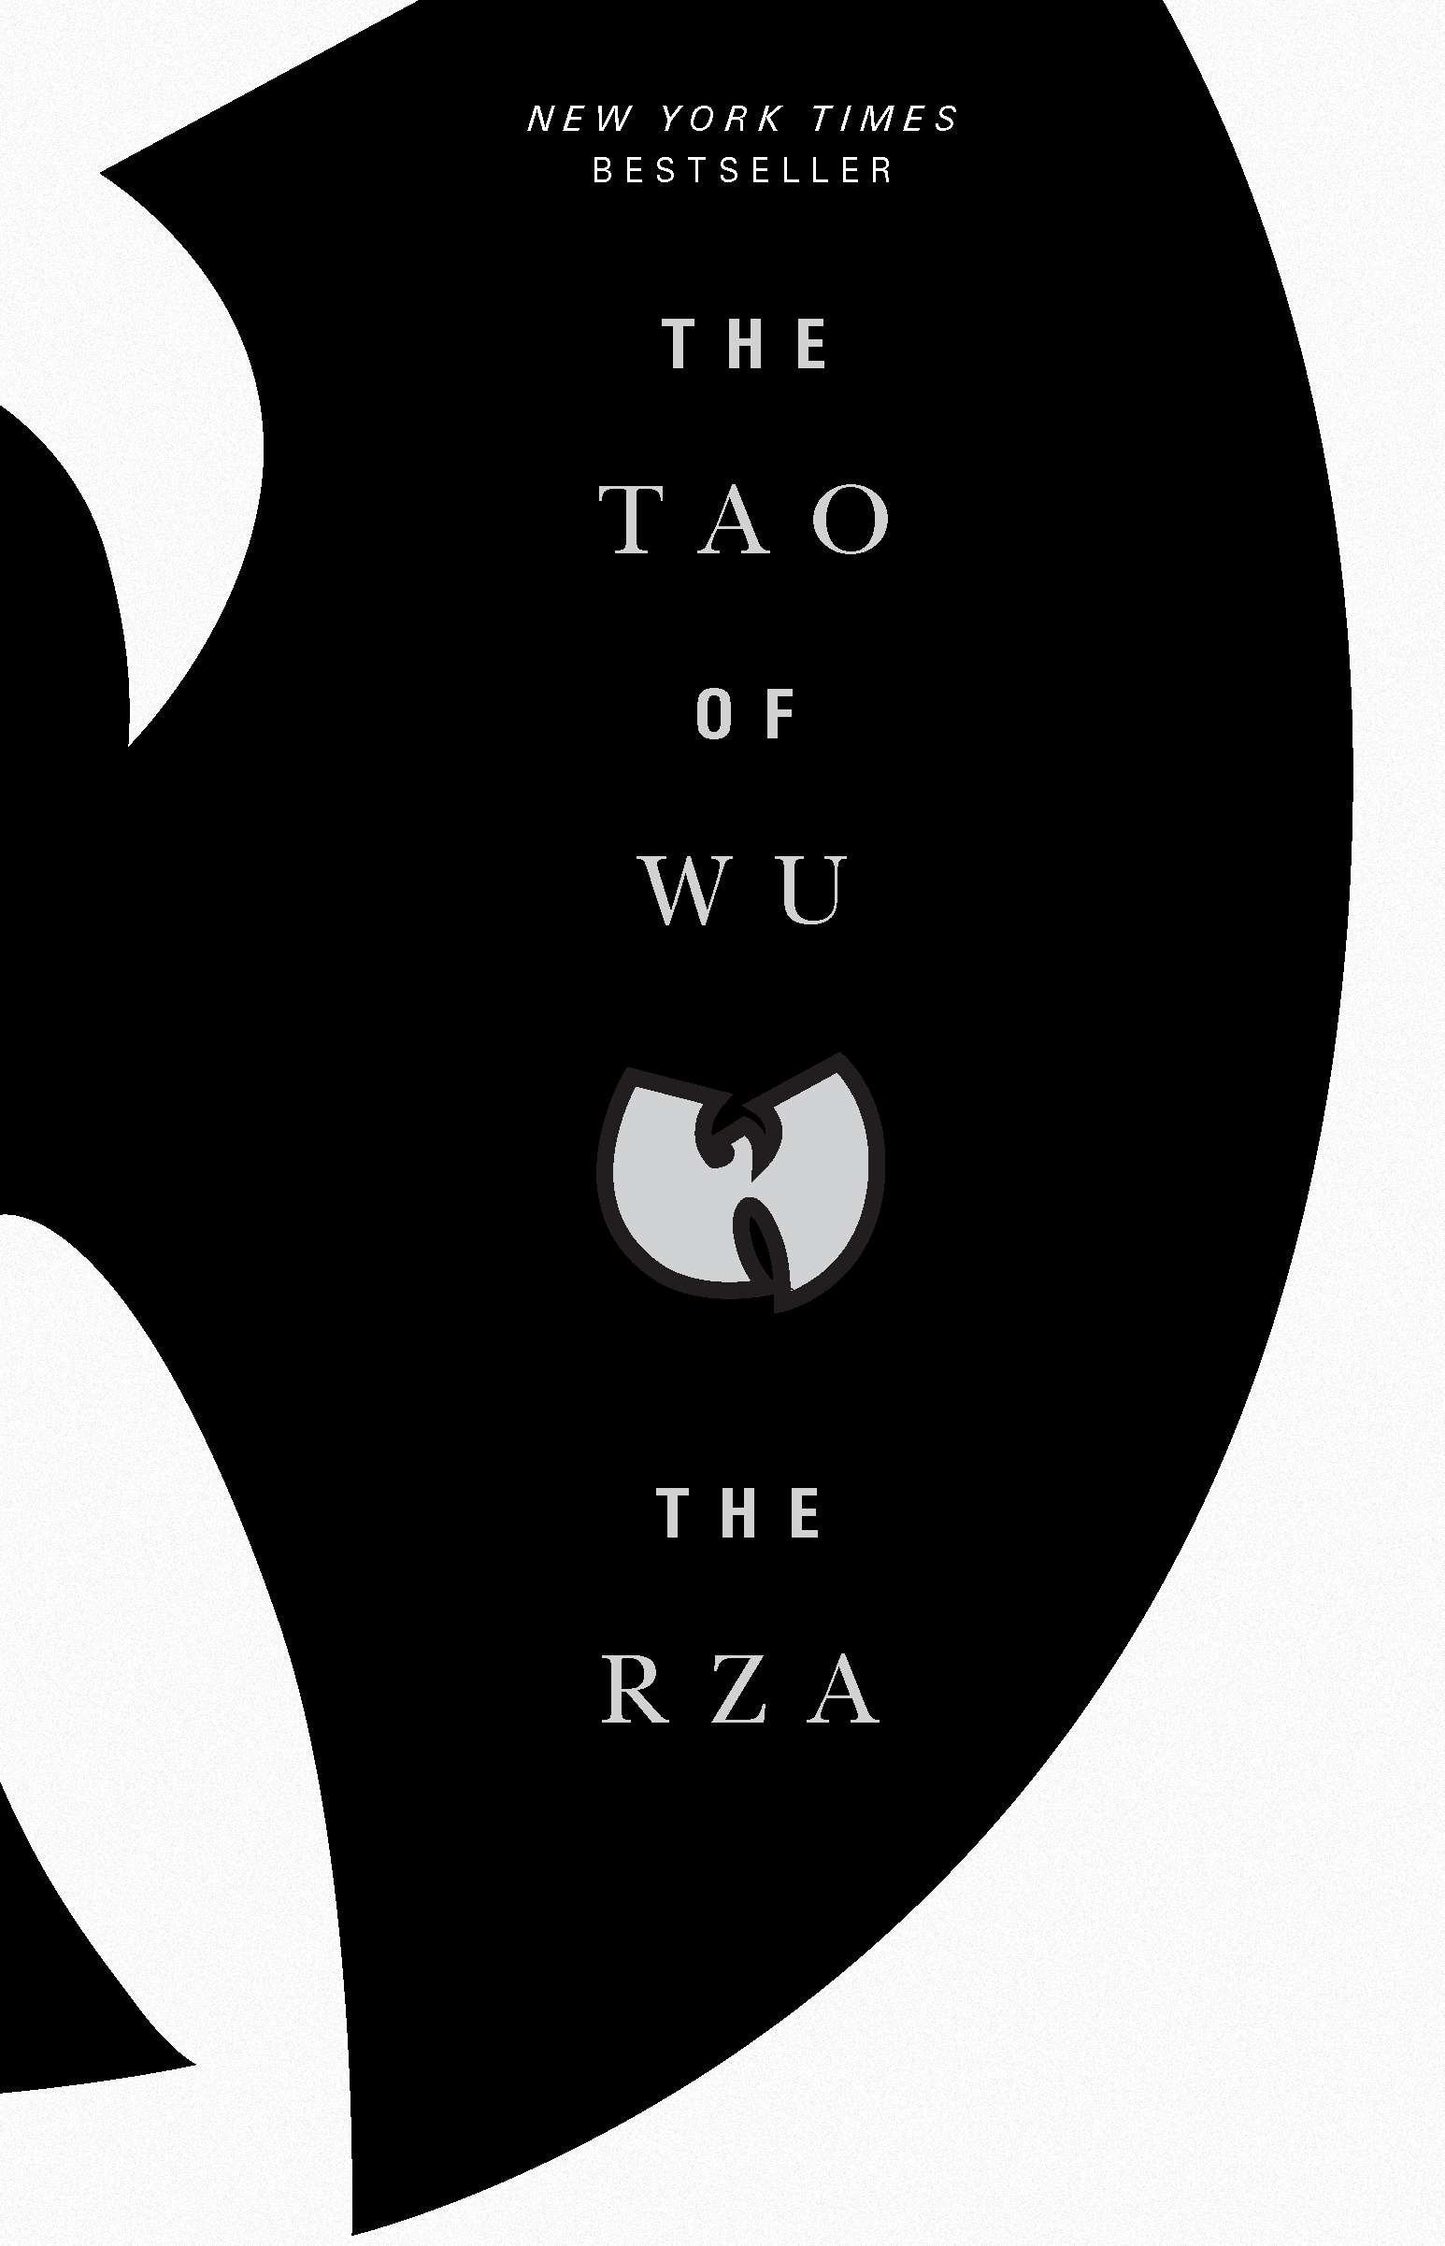 Tao of Wu, by the RZA